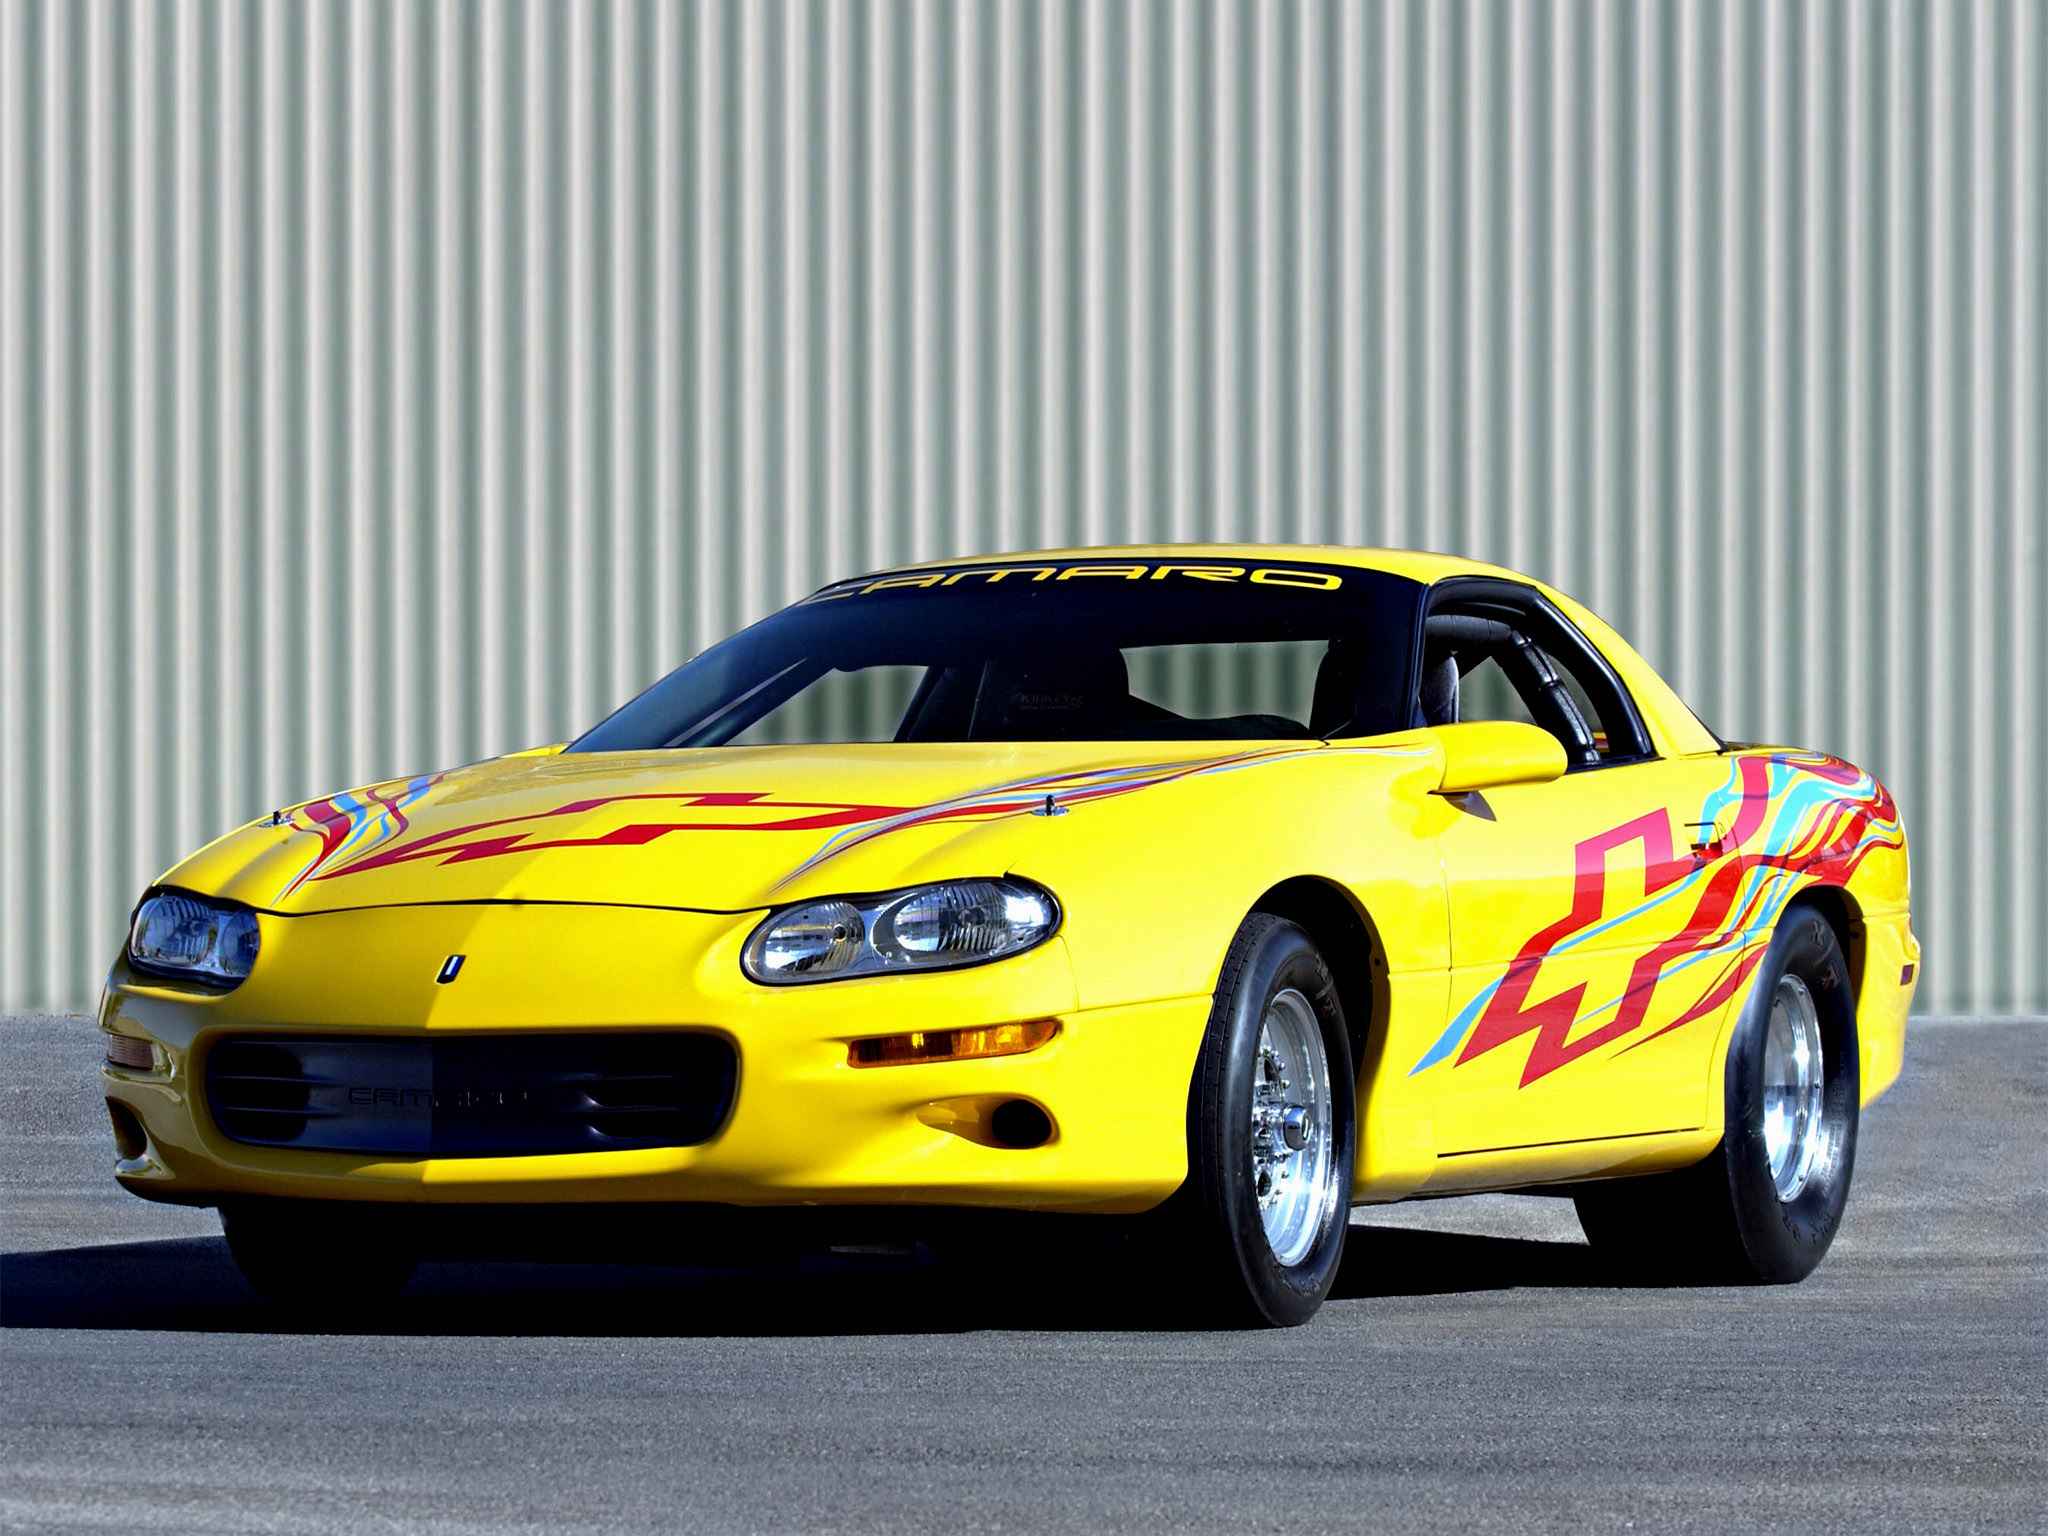 20, 02chevrolet, Camaro, Dragster, Muscle, Drag, Racing, Race, Hot, Rod, Rods Wallpaper